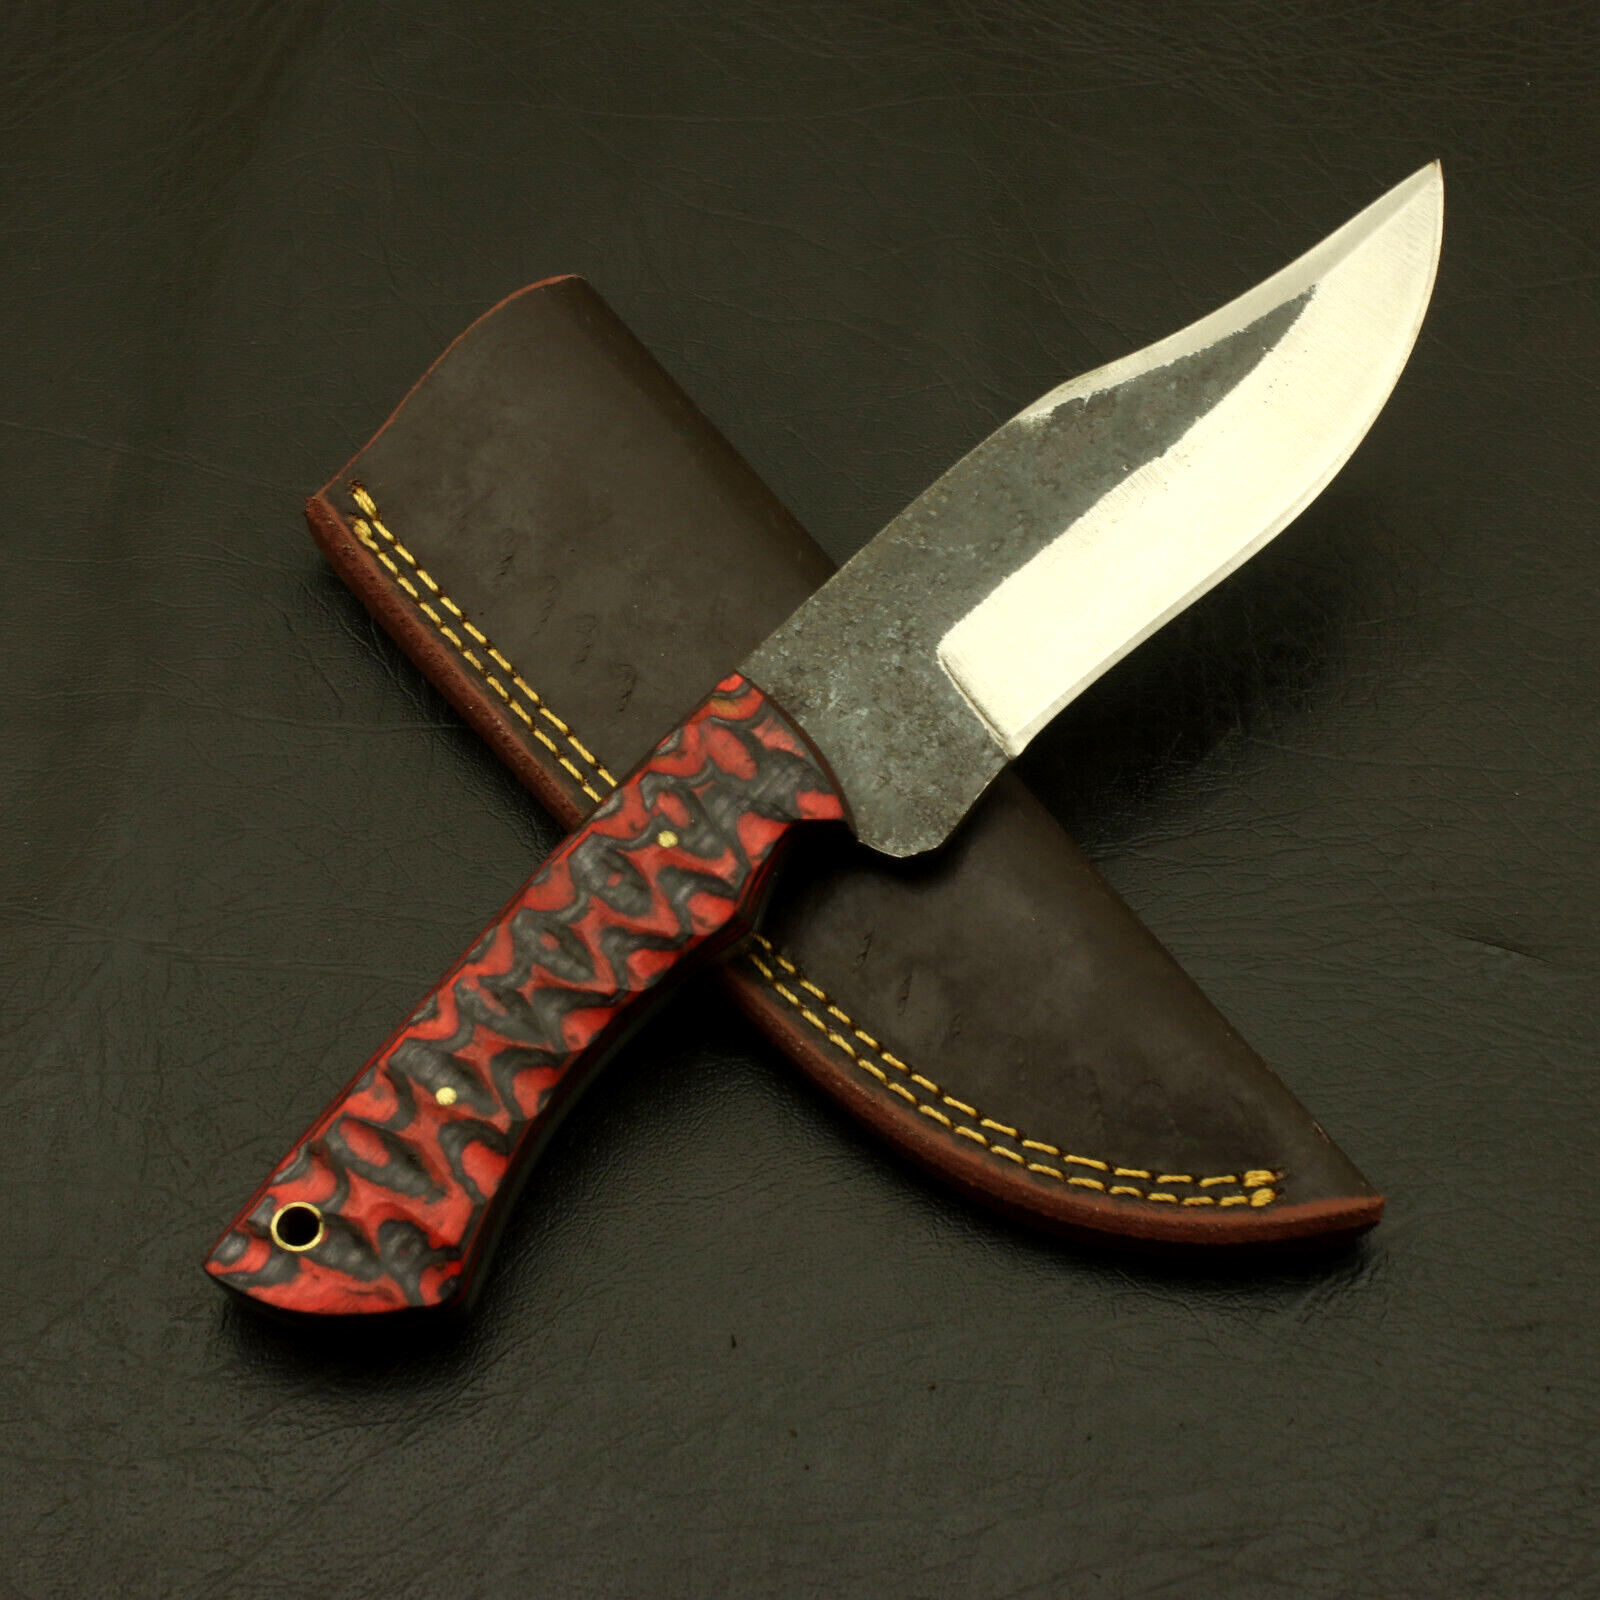 Superb looking Custom hand Forged Railroad Spike Carbon Steel Fixed Blade Knife